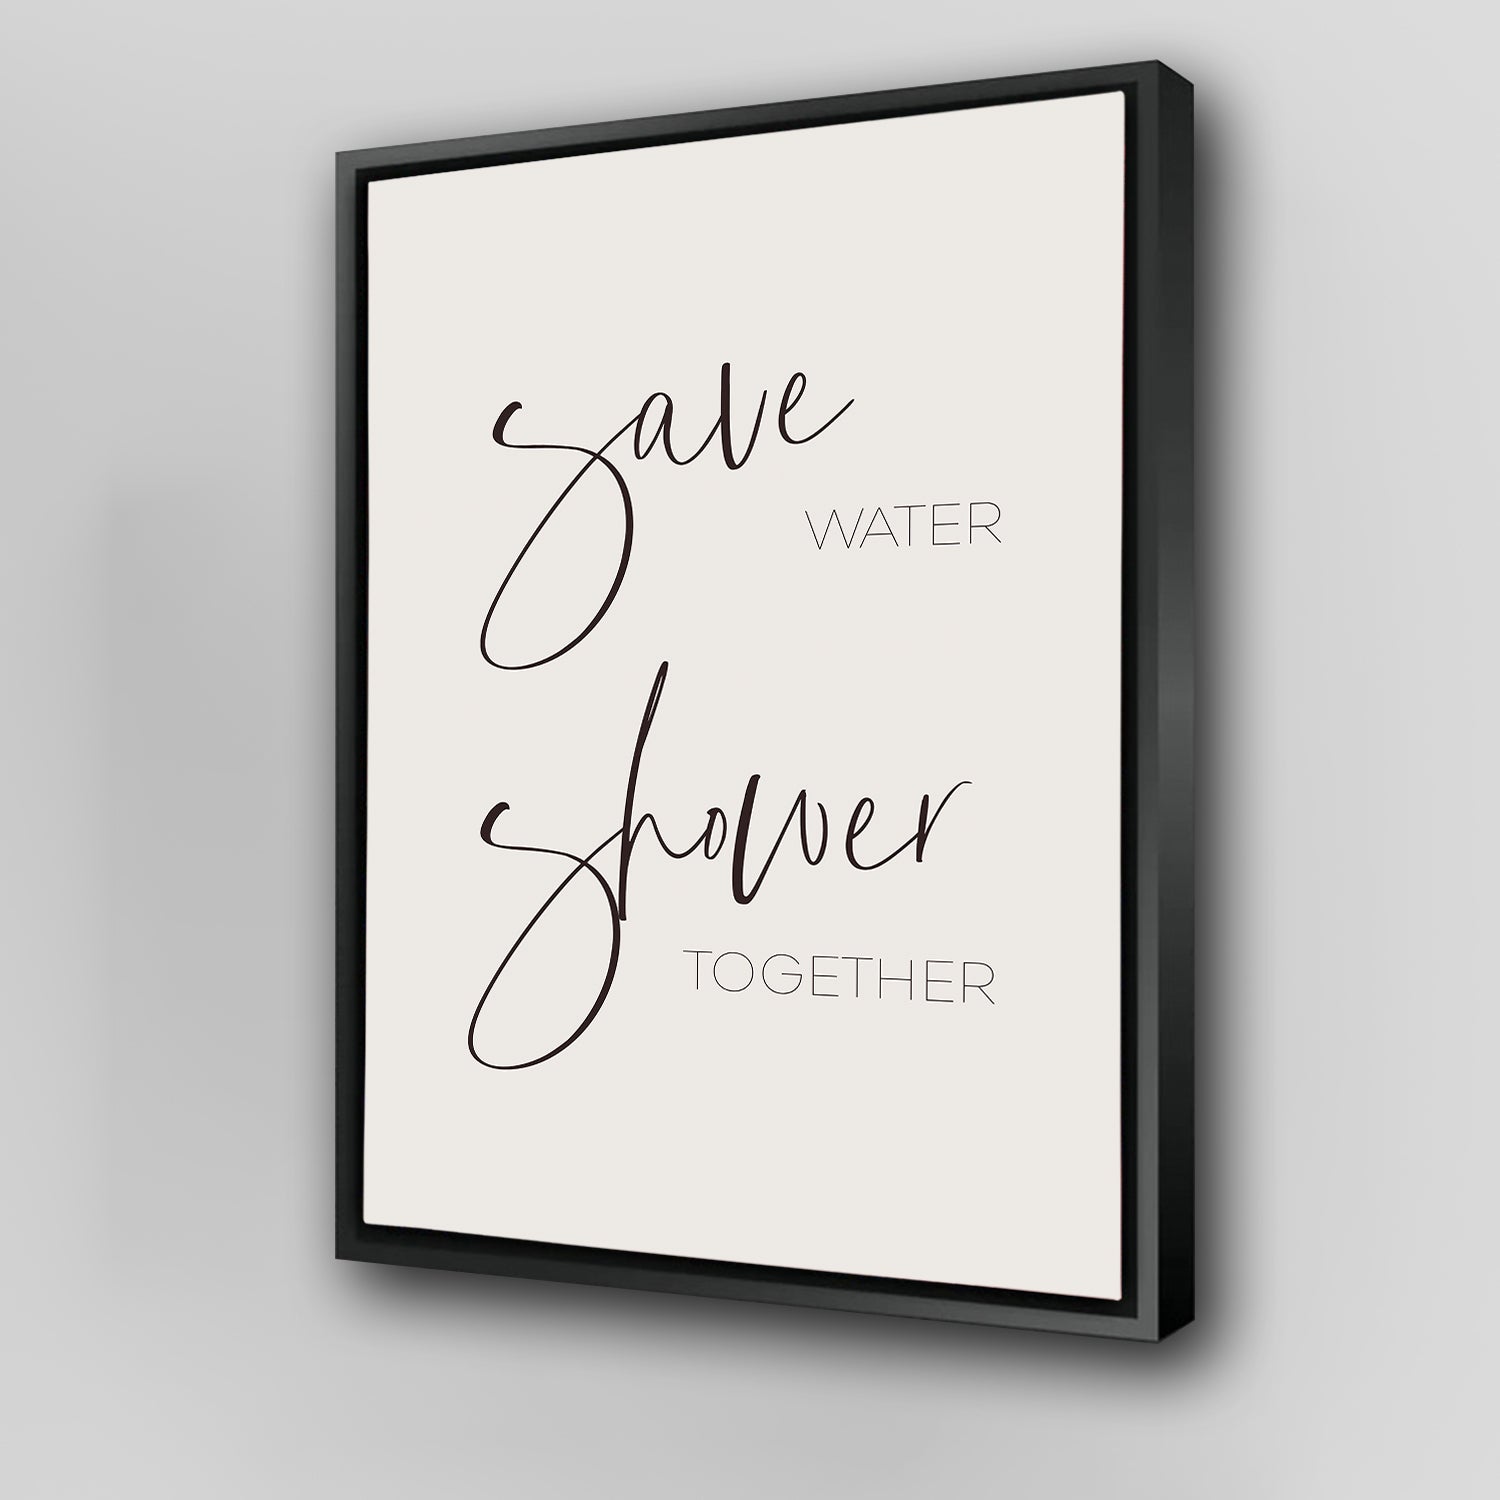 Save Water - Shower Together